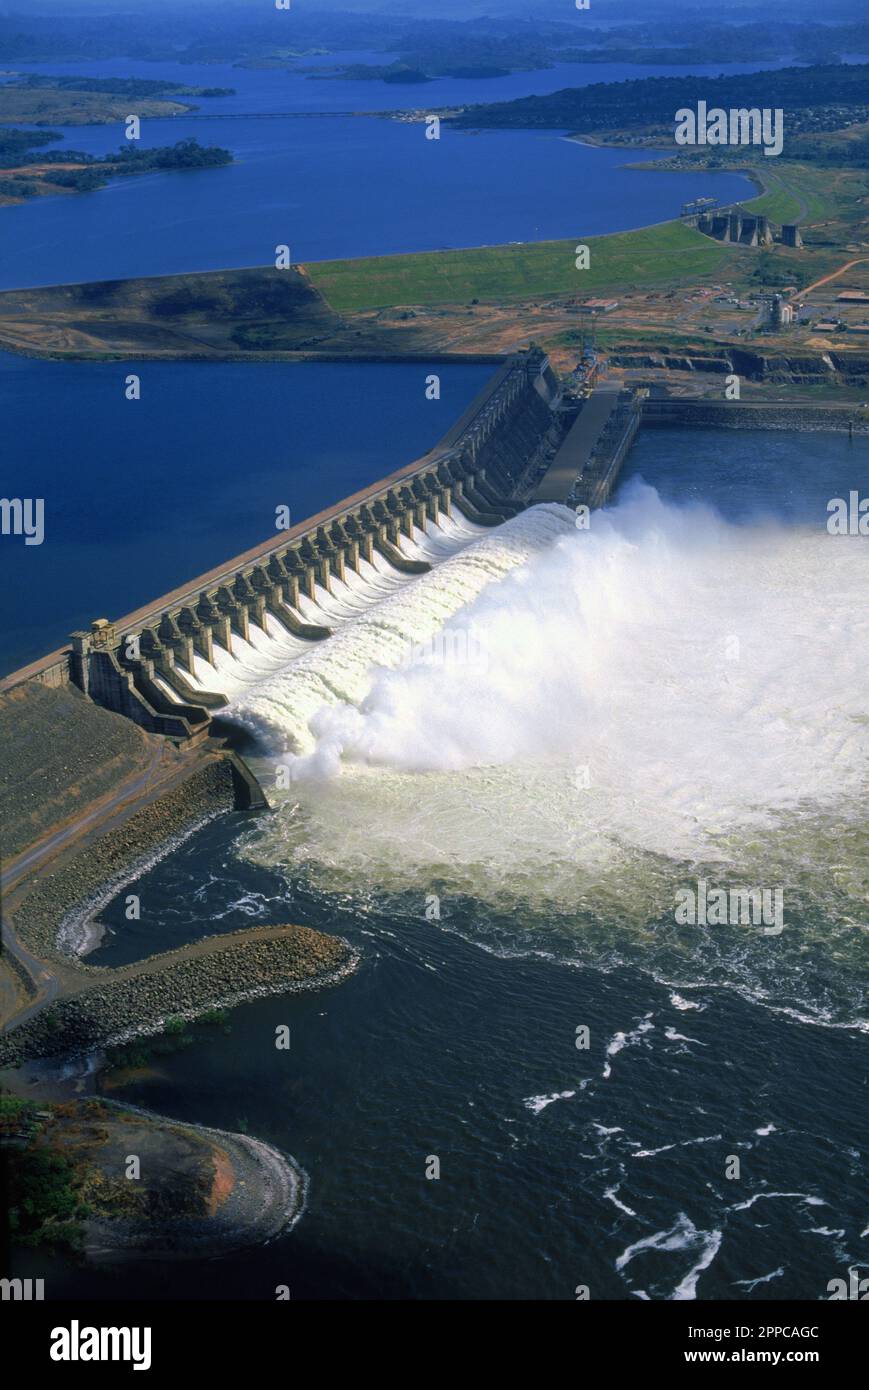 Aerial view of Tucurui hydroelectric dam on the Tocantins River in the Amazon region of Brazil (Para State). Stock Photo